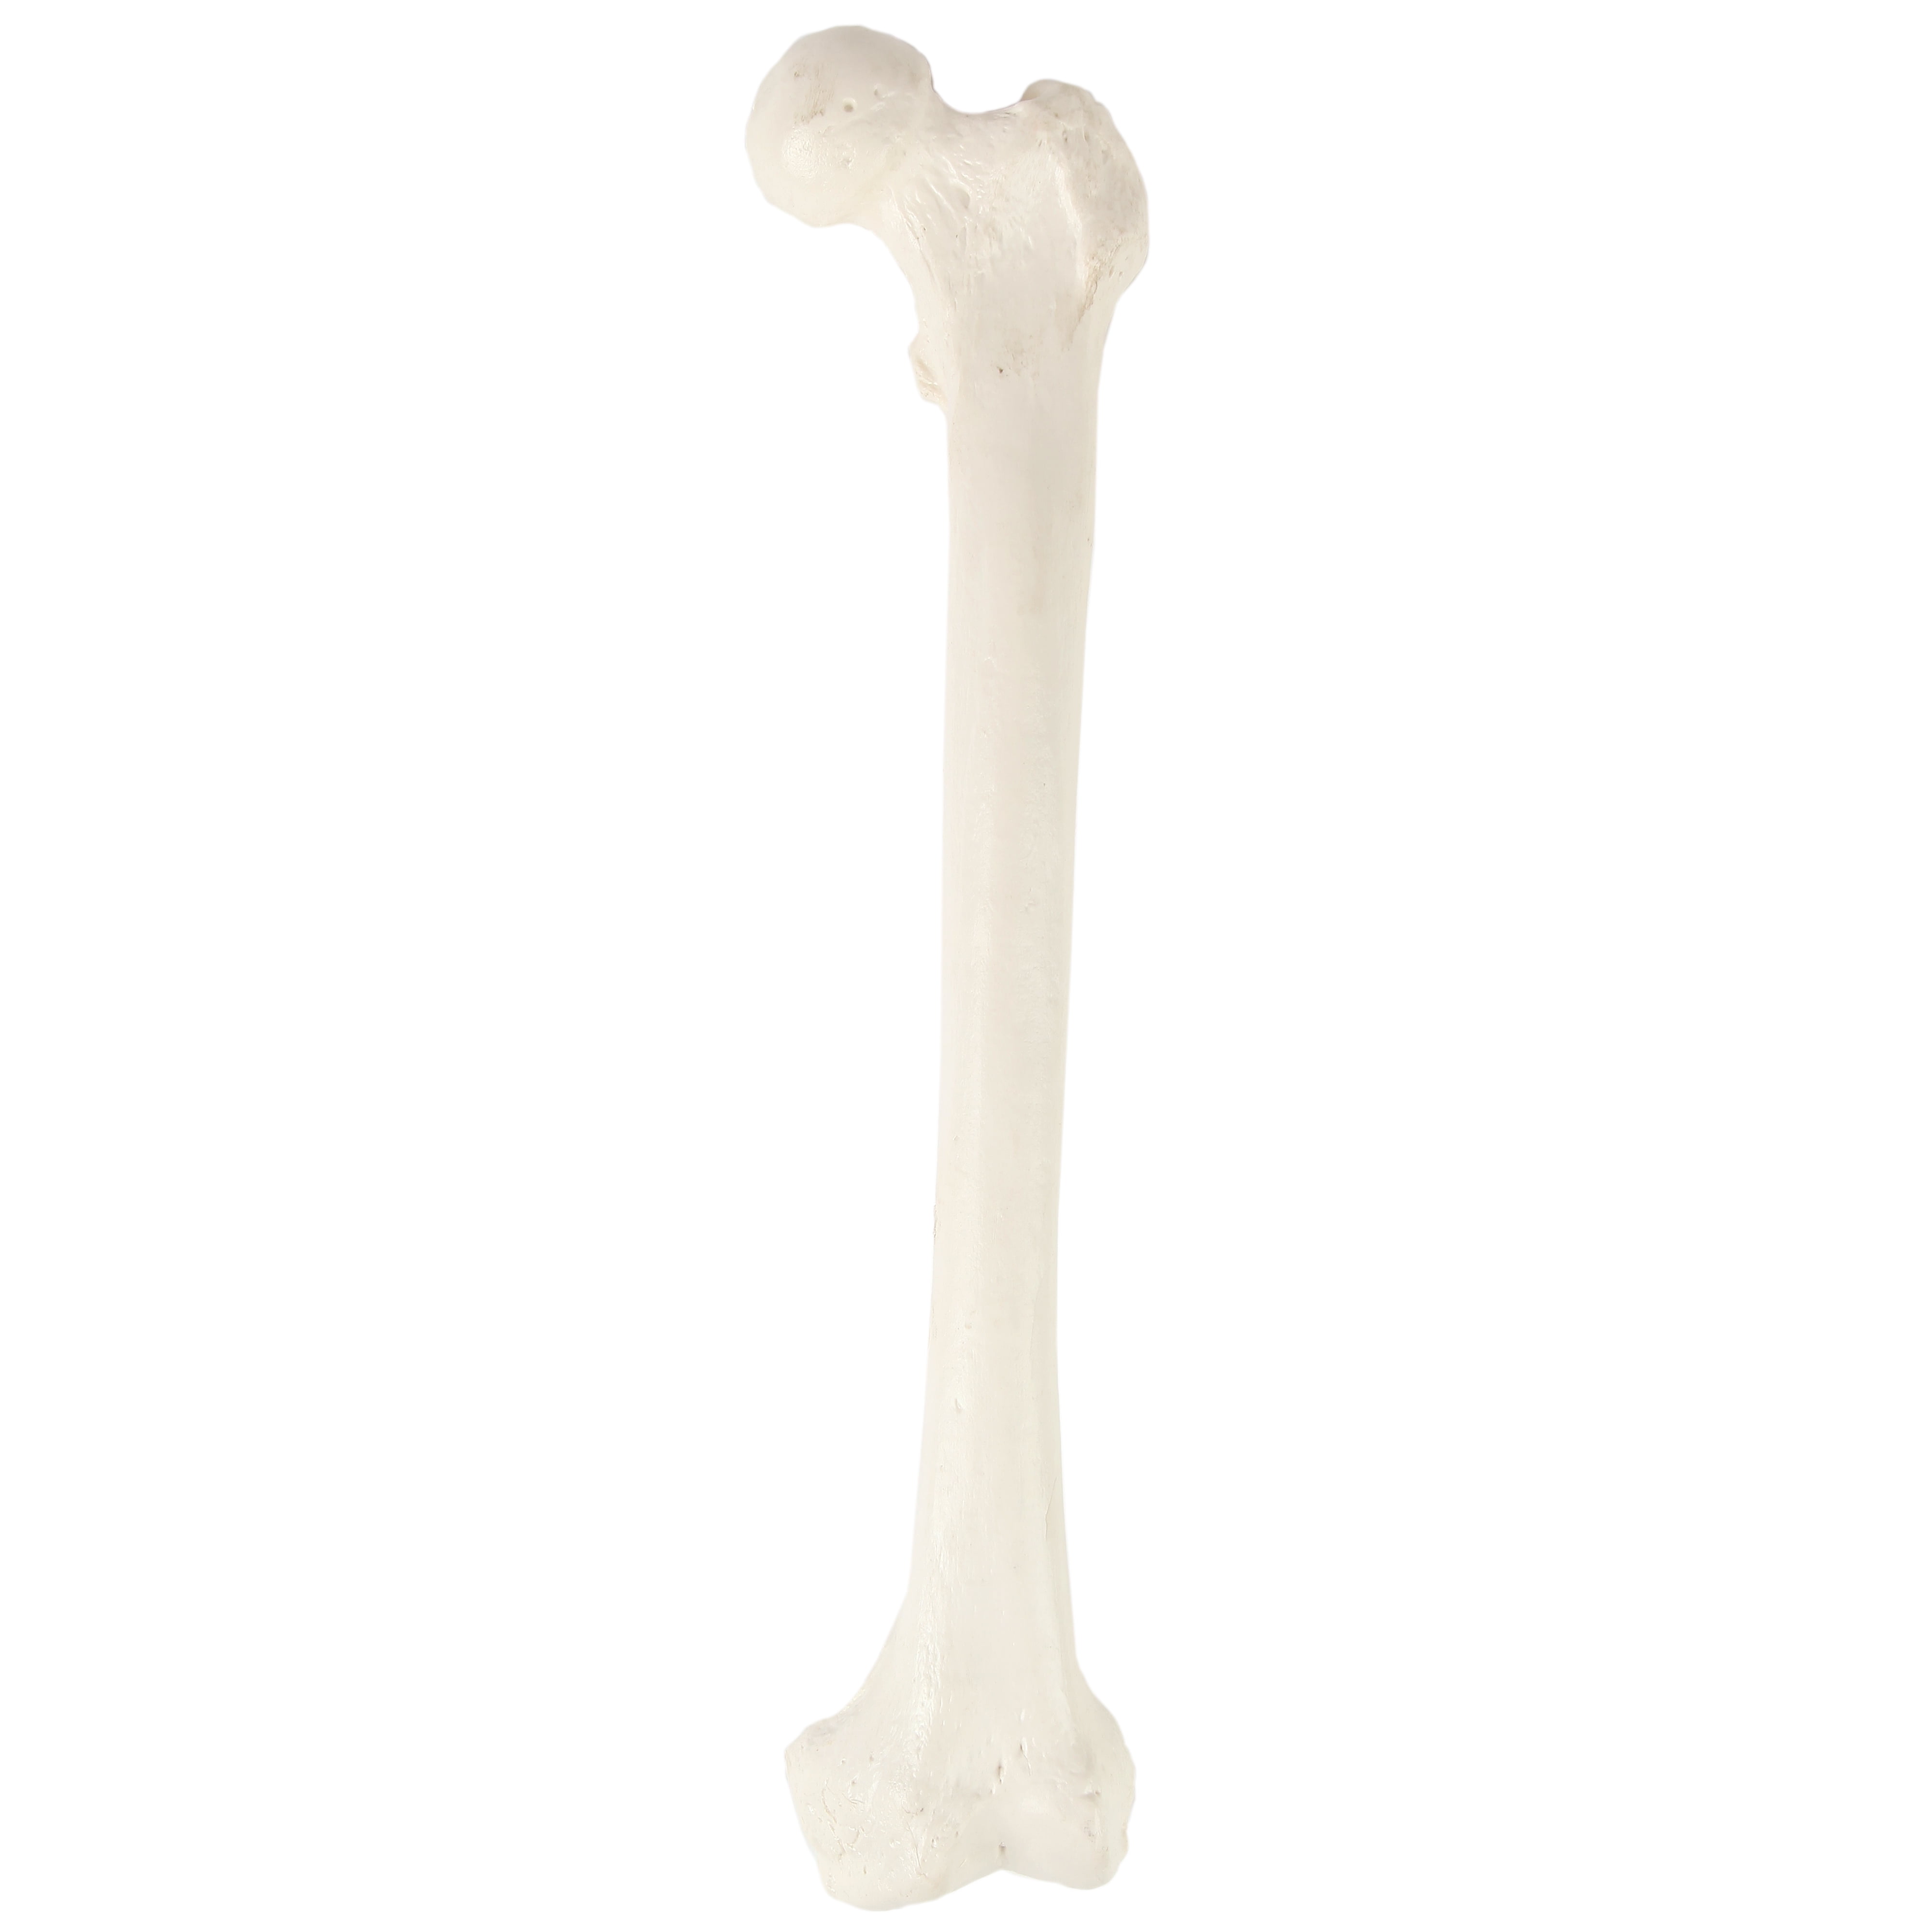 Left Axis Scientific Hip Bone Model Cast from a Real Human Coxal Bone l Hip Bone Model Has Realistic Texture and Important Bony Landmarks 3 Year Warranty Includes Product Manual 